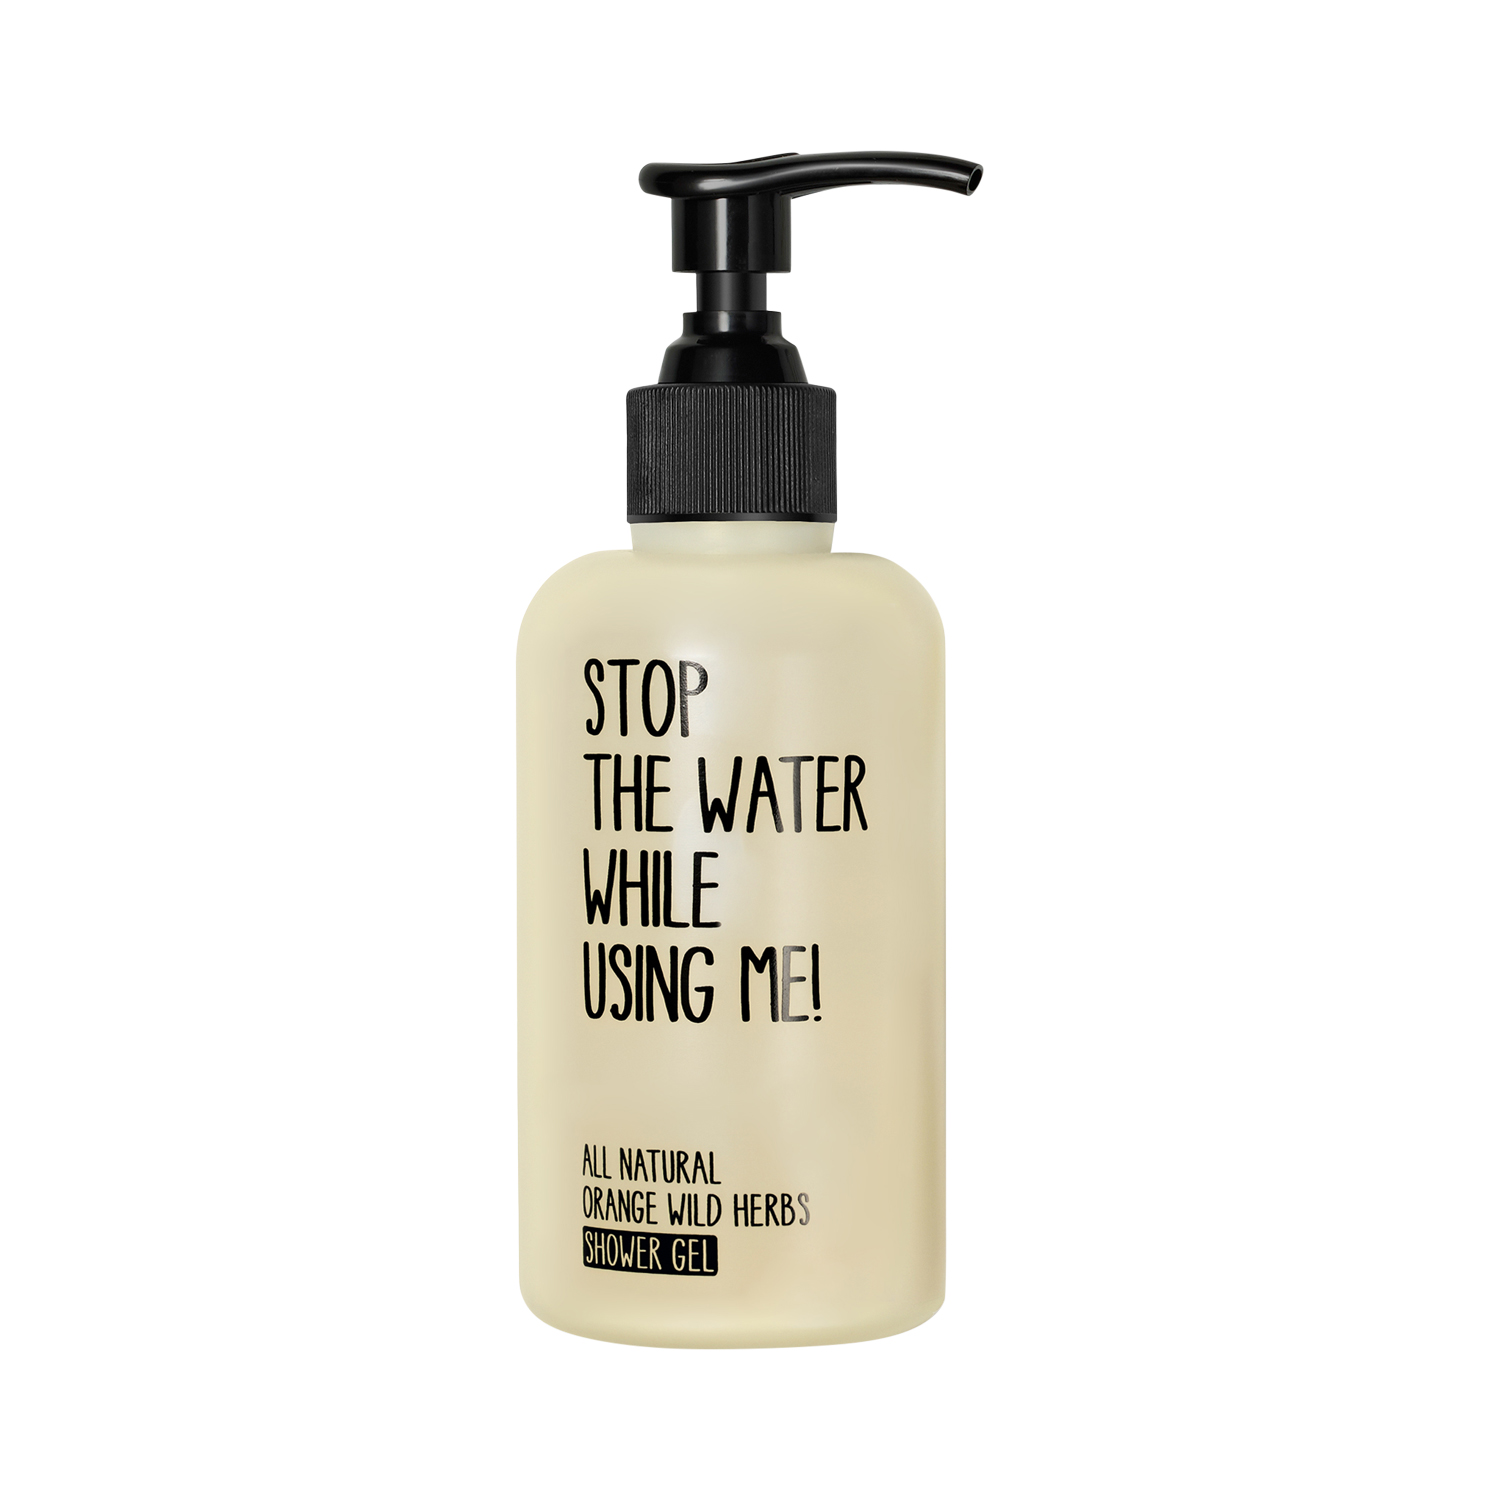 Stop The Water While Using Me! - All Natural Orange Wild Herbs Shower Gel - Duschgel